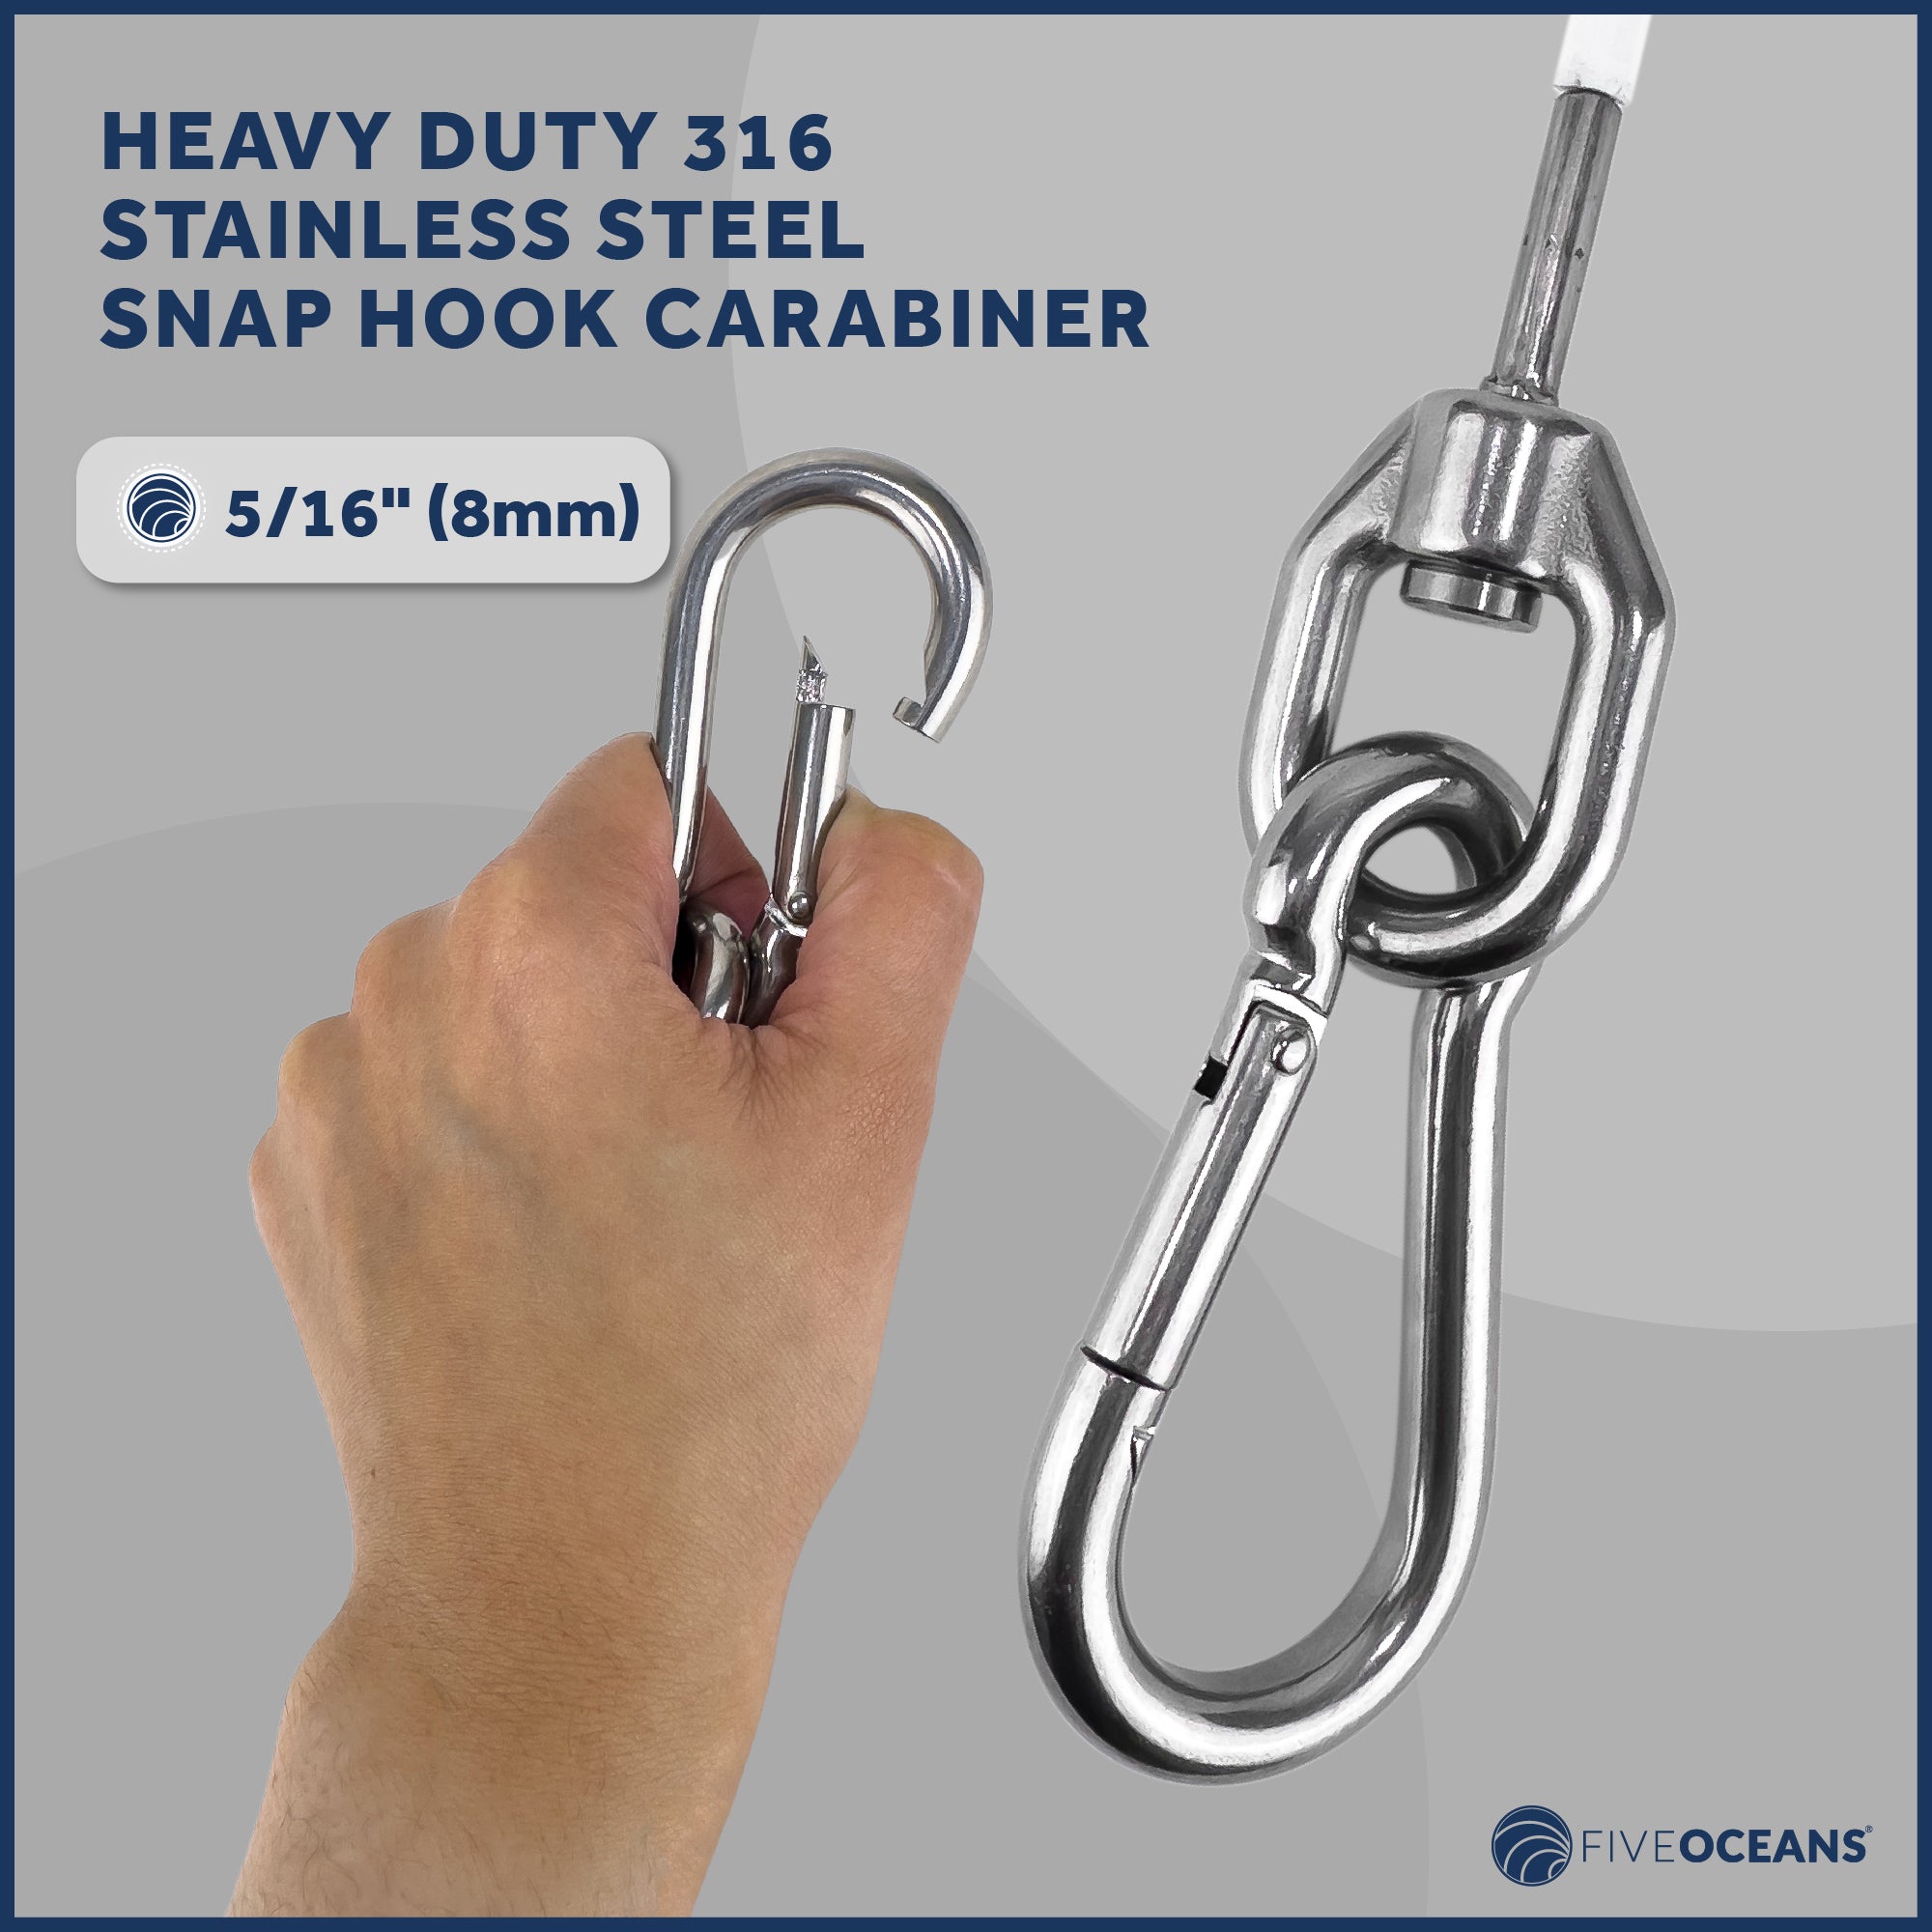 Anchor Safety Strap, Snap Hook Carabiner and 5/16" U-Bolt - FO4560